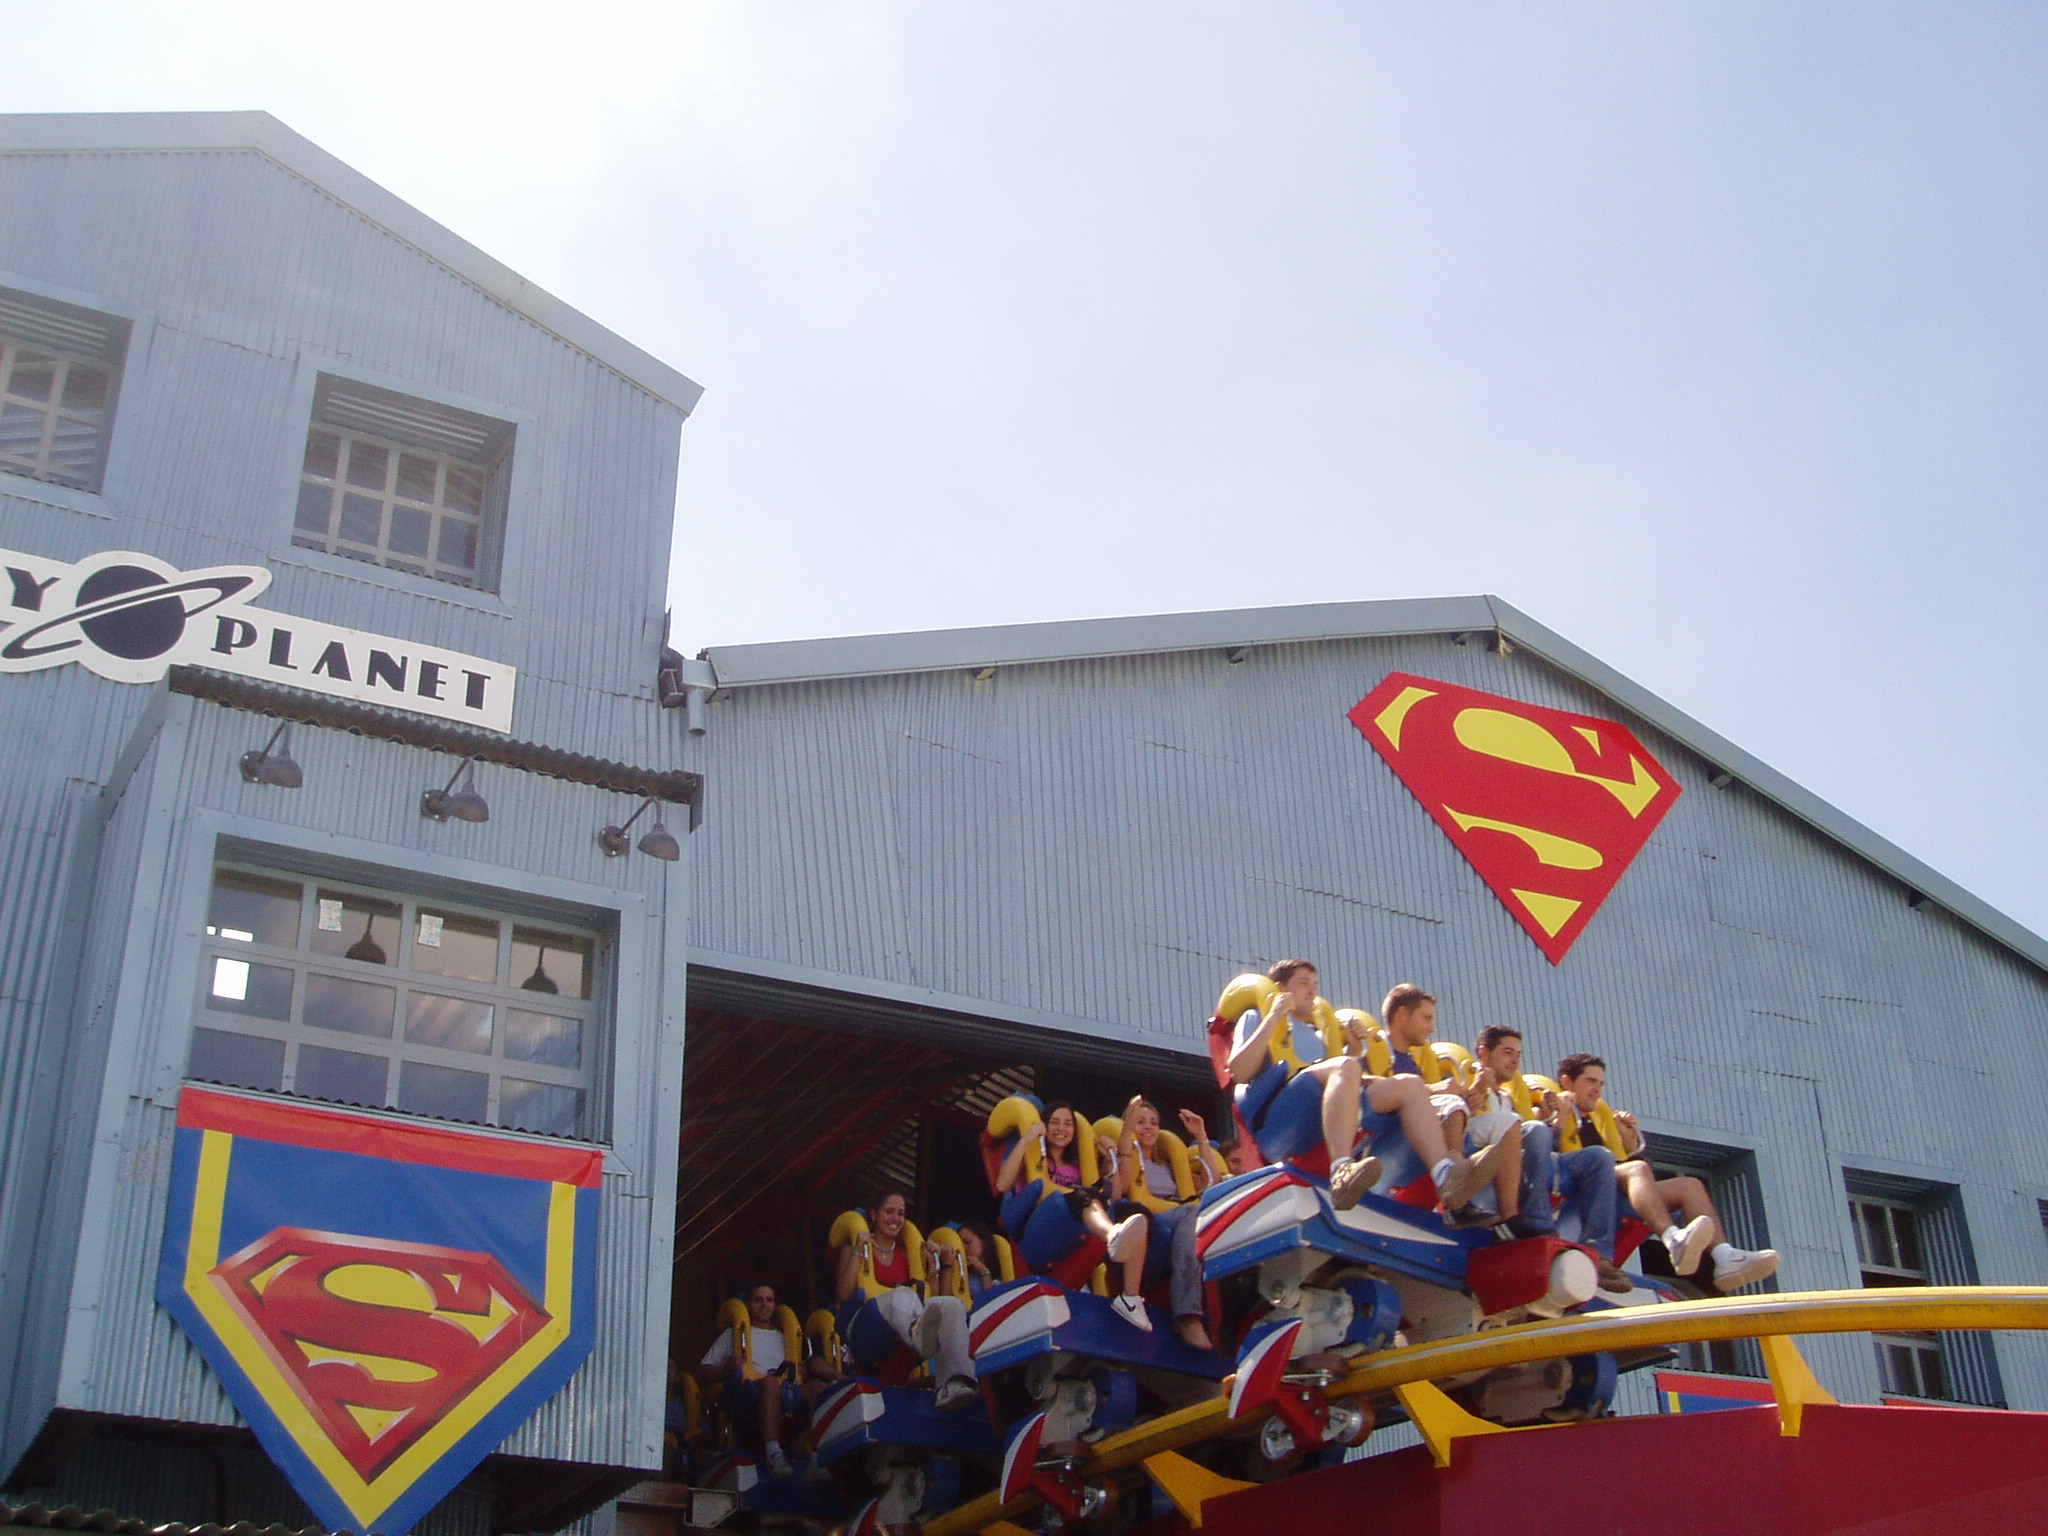 You are currently viewing Superman (Parque Warner Madrid)